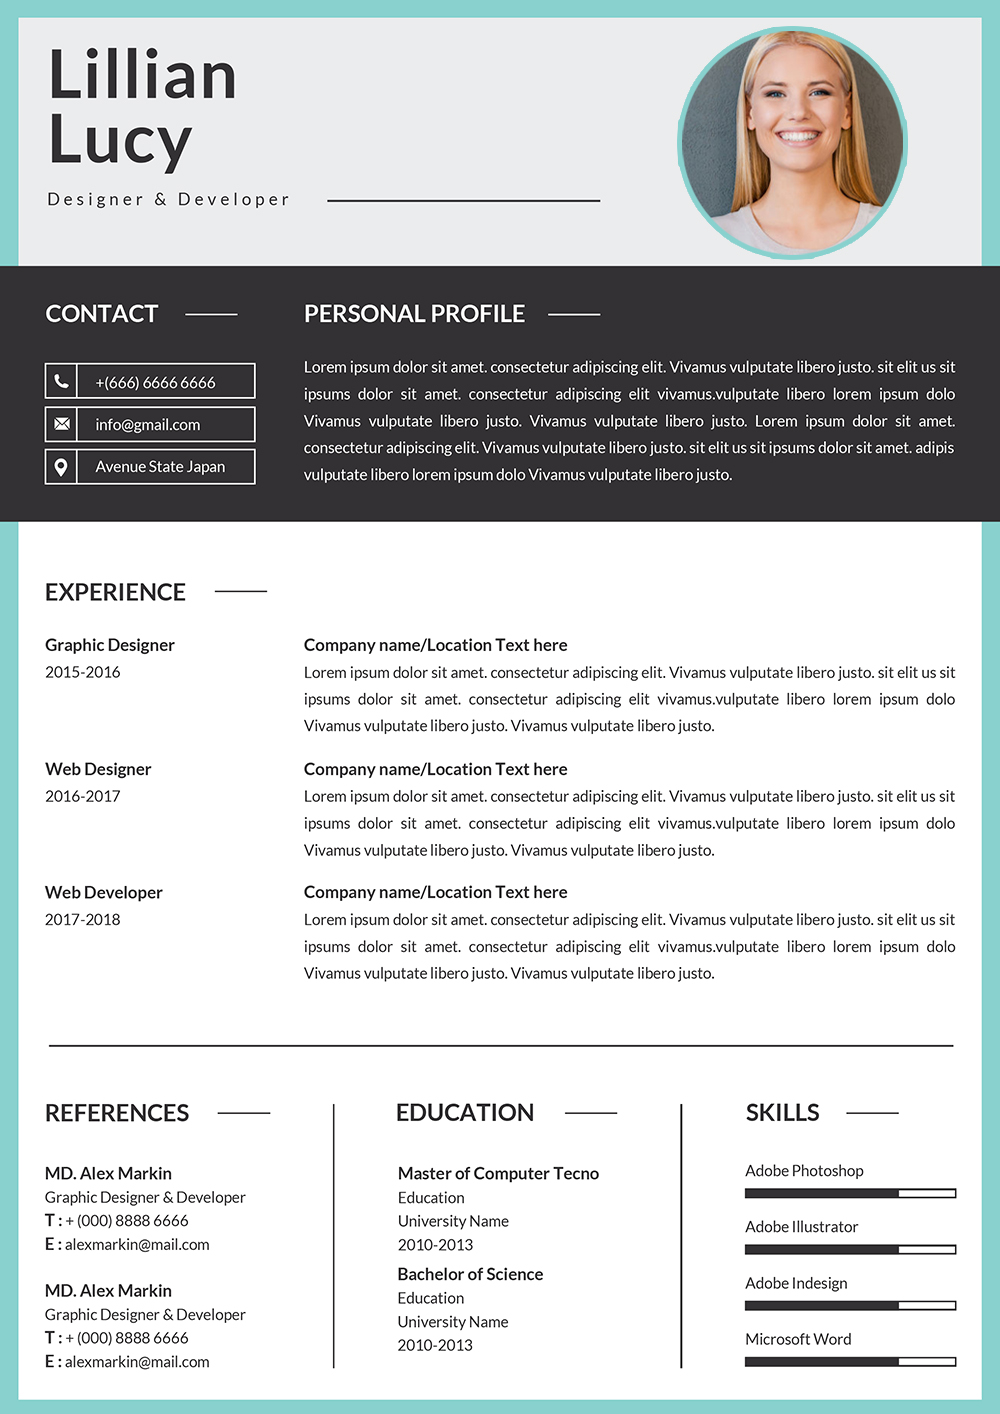 50 Free Ms Word Resume Cv Templates To Download In 2021